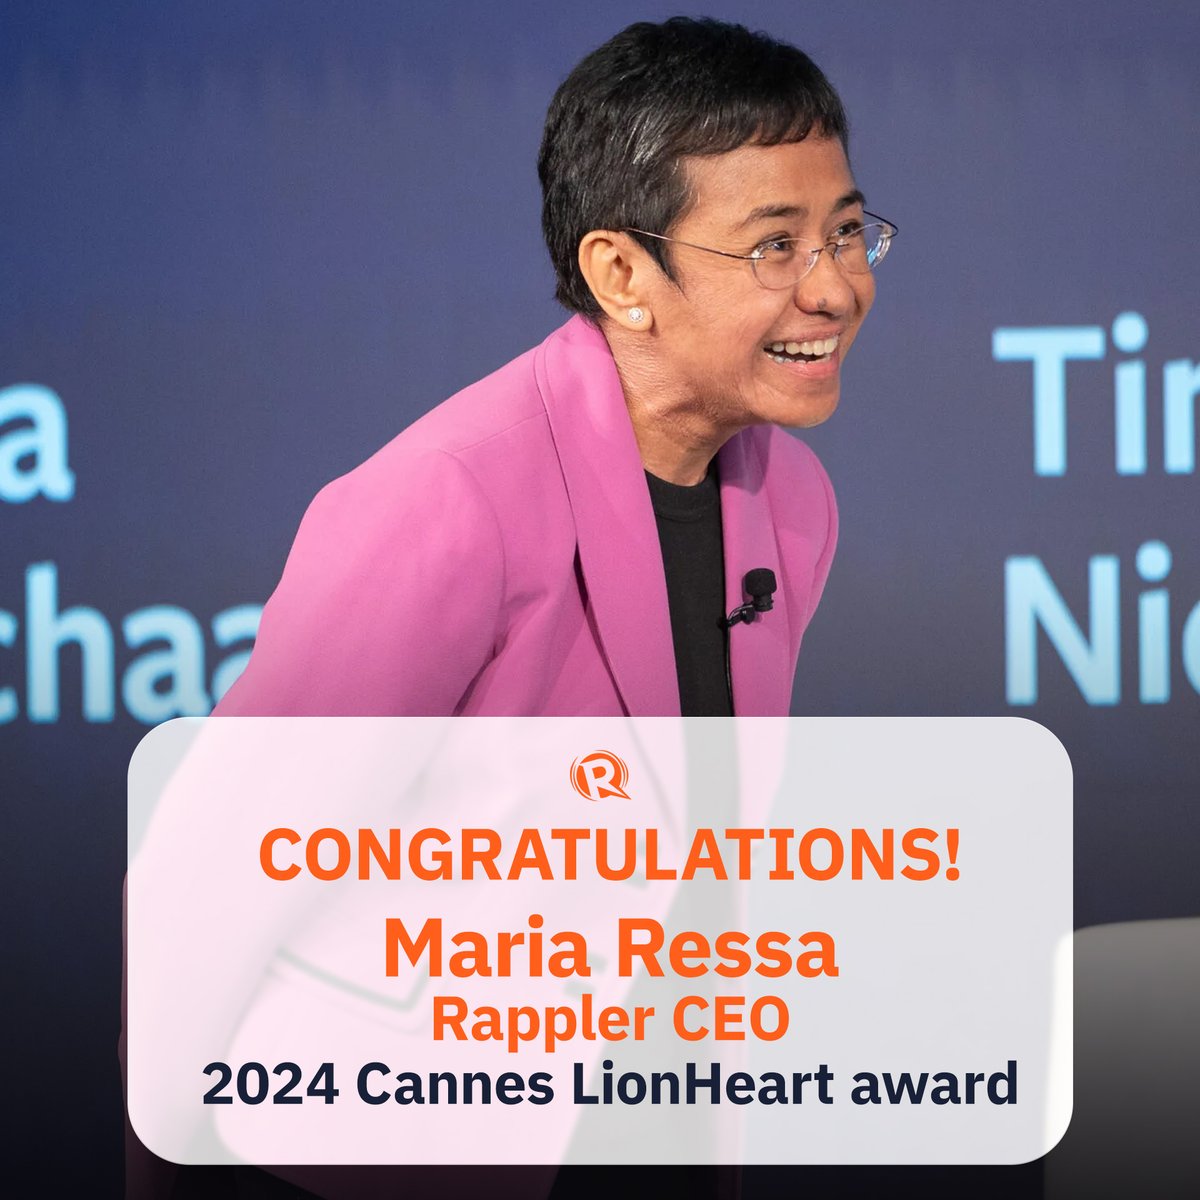 Rappler CEO and Nobel Peace Prize laureate Maria Ressa is awarded the prestigious Cannes LionHeart for 2024, Cannes Lions announces on Thursday, May 9. 

Congrats, Maria! #CourageON #TeamRappler trib.al/fIvcLGH